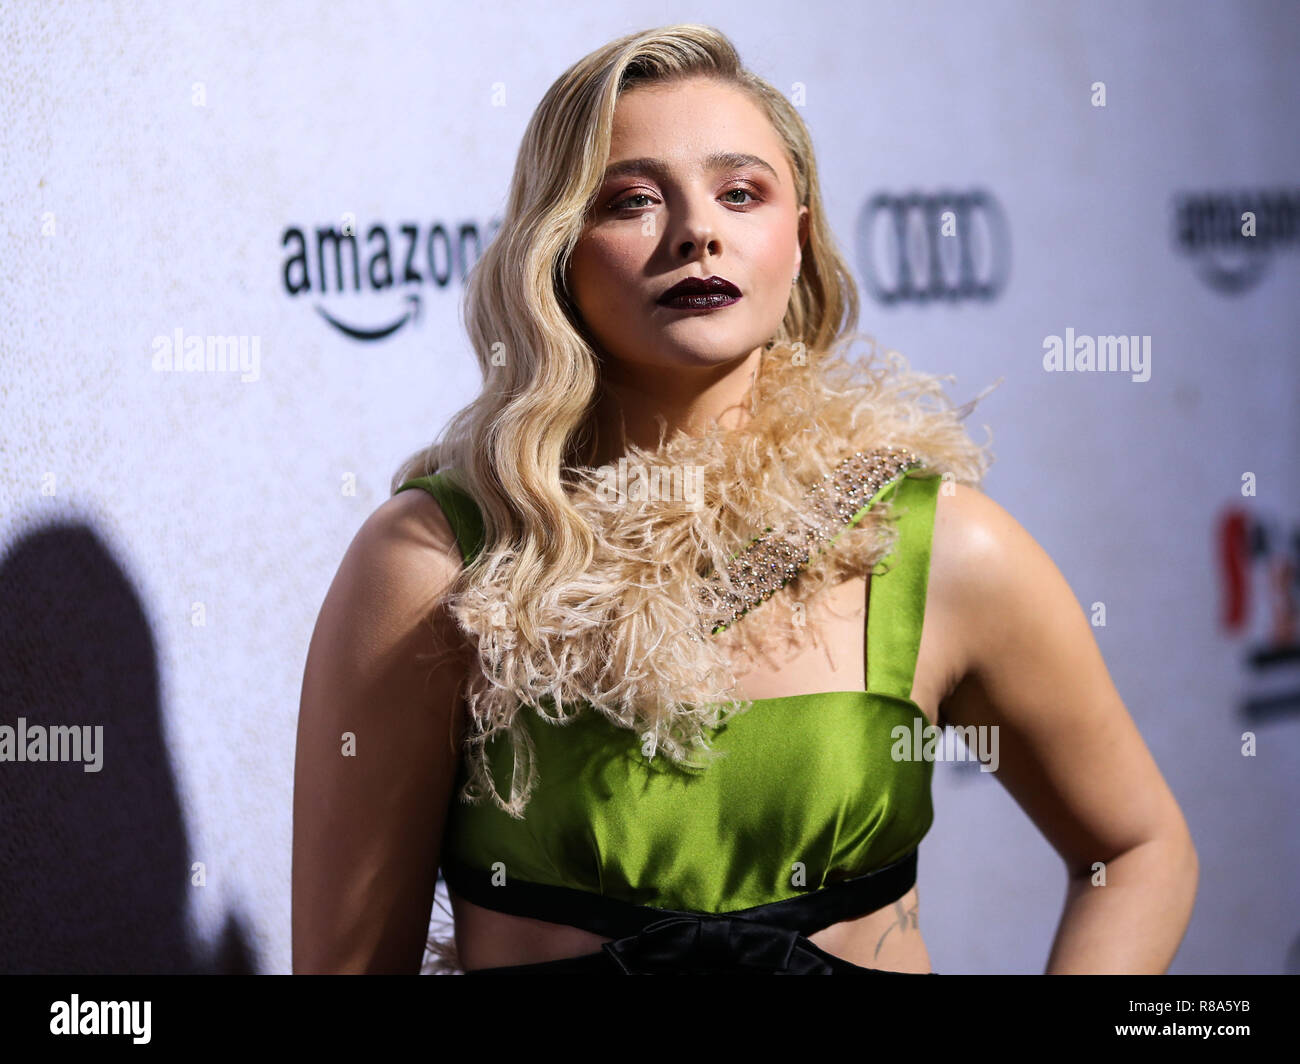 HOLLYWOOD, LOS ANGELES, CA, USA - OCTOBER 24: Actress Chloe Grace Moretz wearing a Miu Miu dress arrives at the Los Angeles Premiere Of Amazon Studio's 'Suspiria' held at the ArcLight Cinerama Dome on October 24, 2018 in Hollywood, Los Angeles, California, United States. (Photo by Xavier Collin/Image Press Agency) Stock Photo